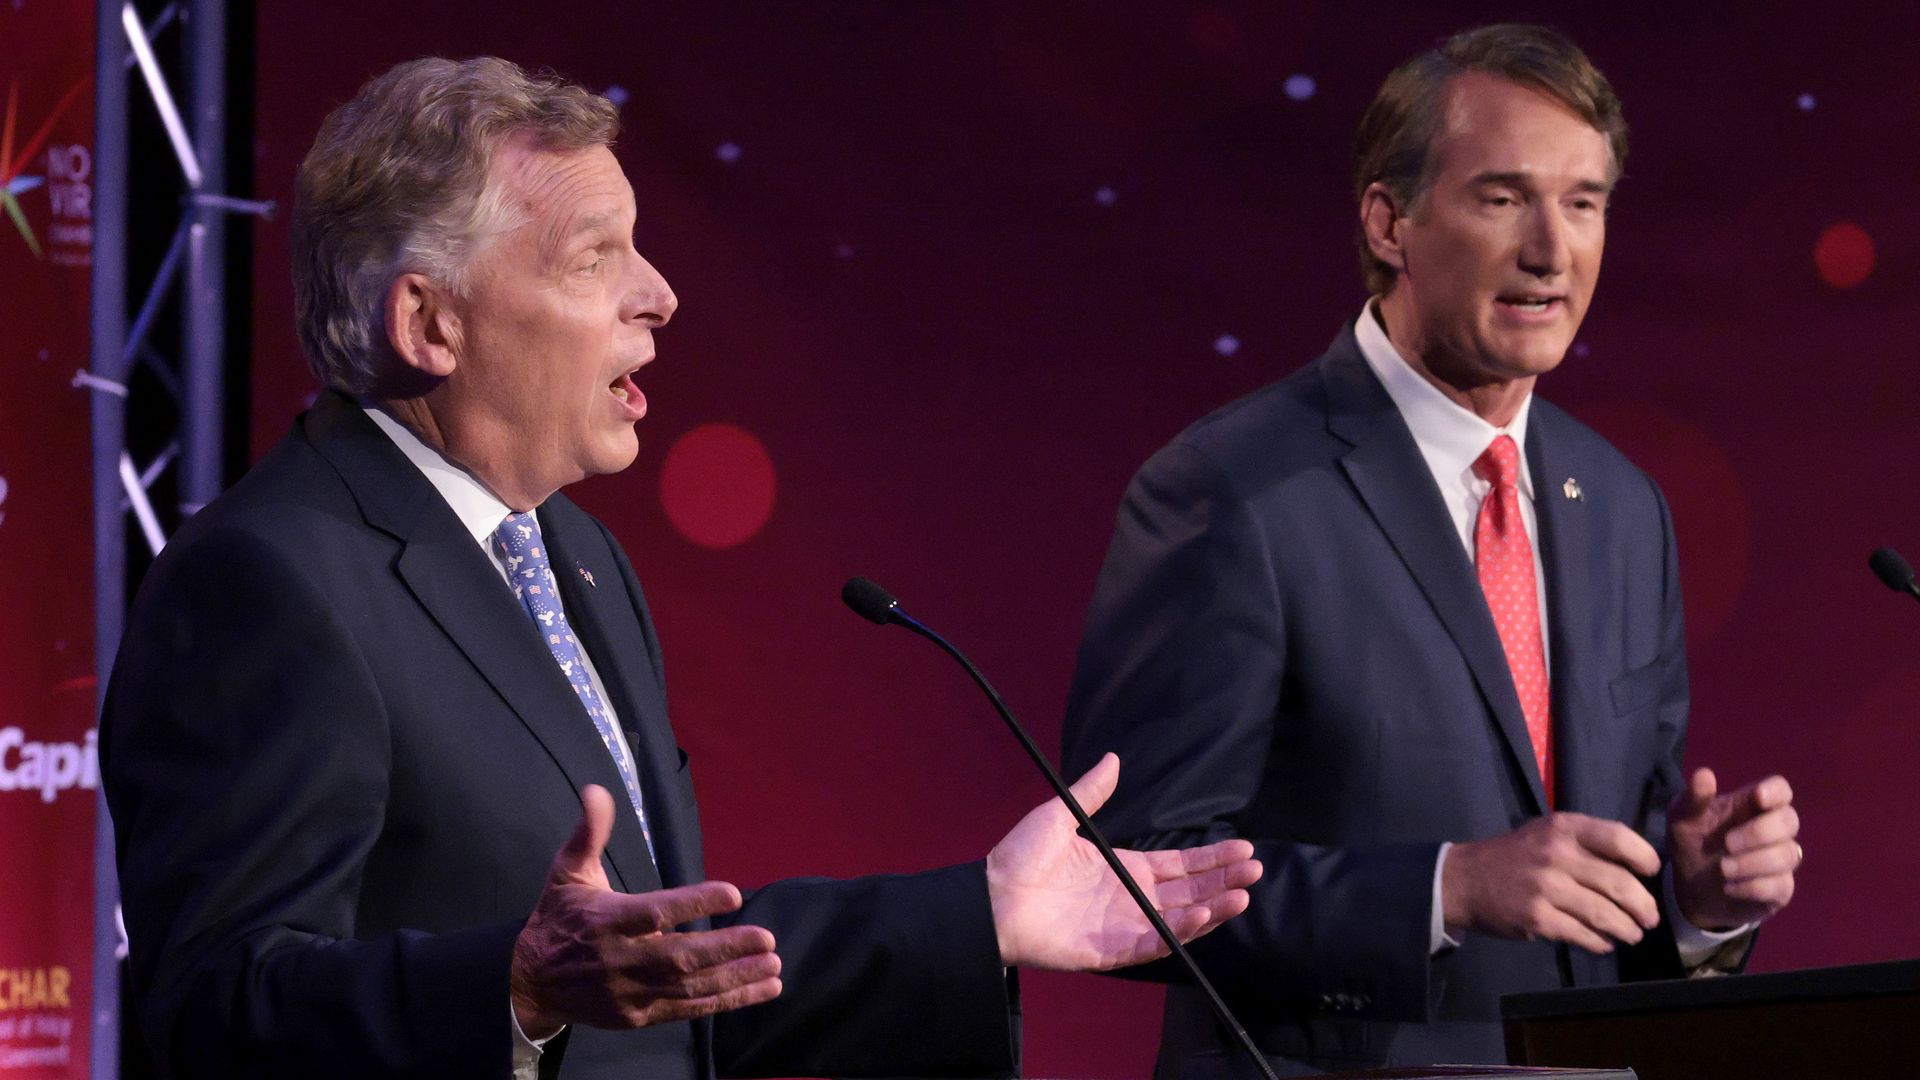 Terry McAuliffe and Glenn Youngkin are seen during a debate.